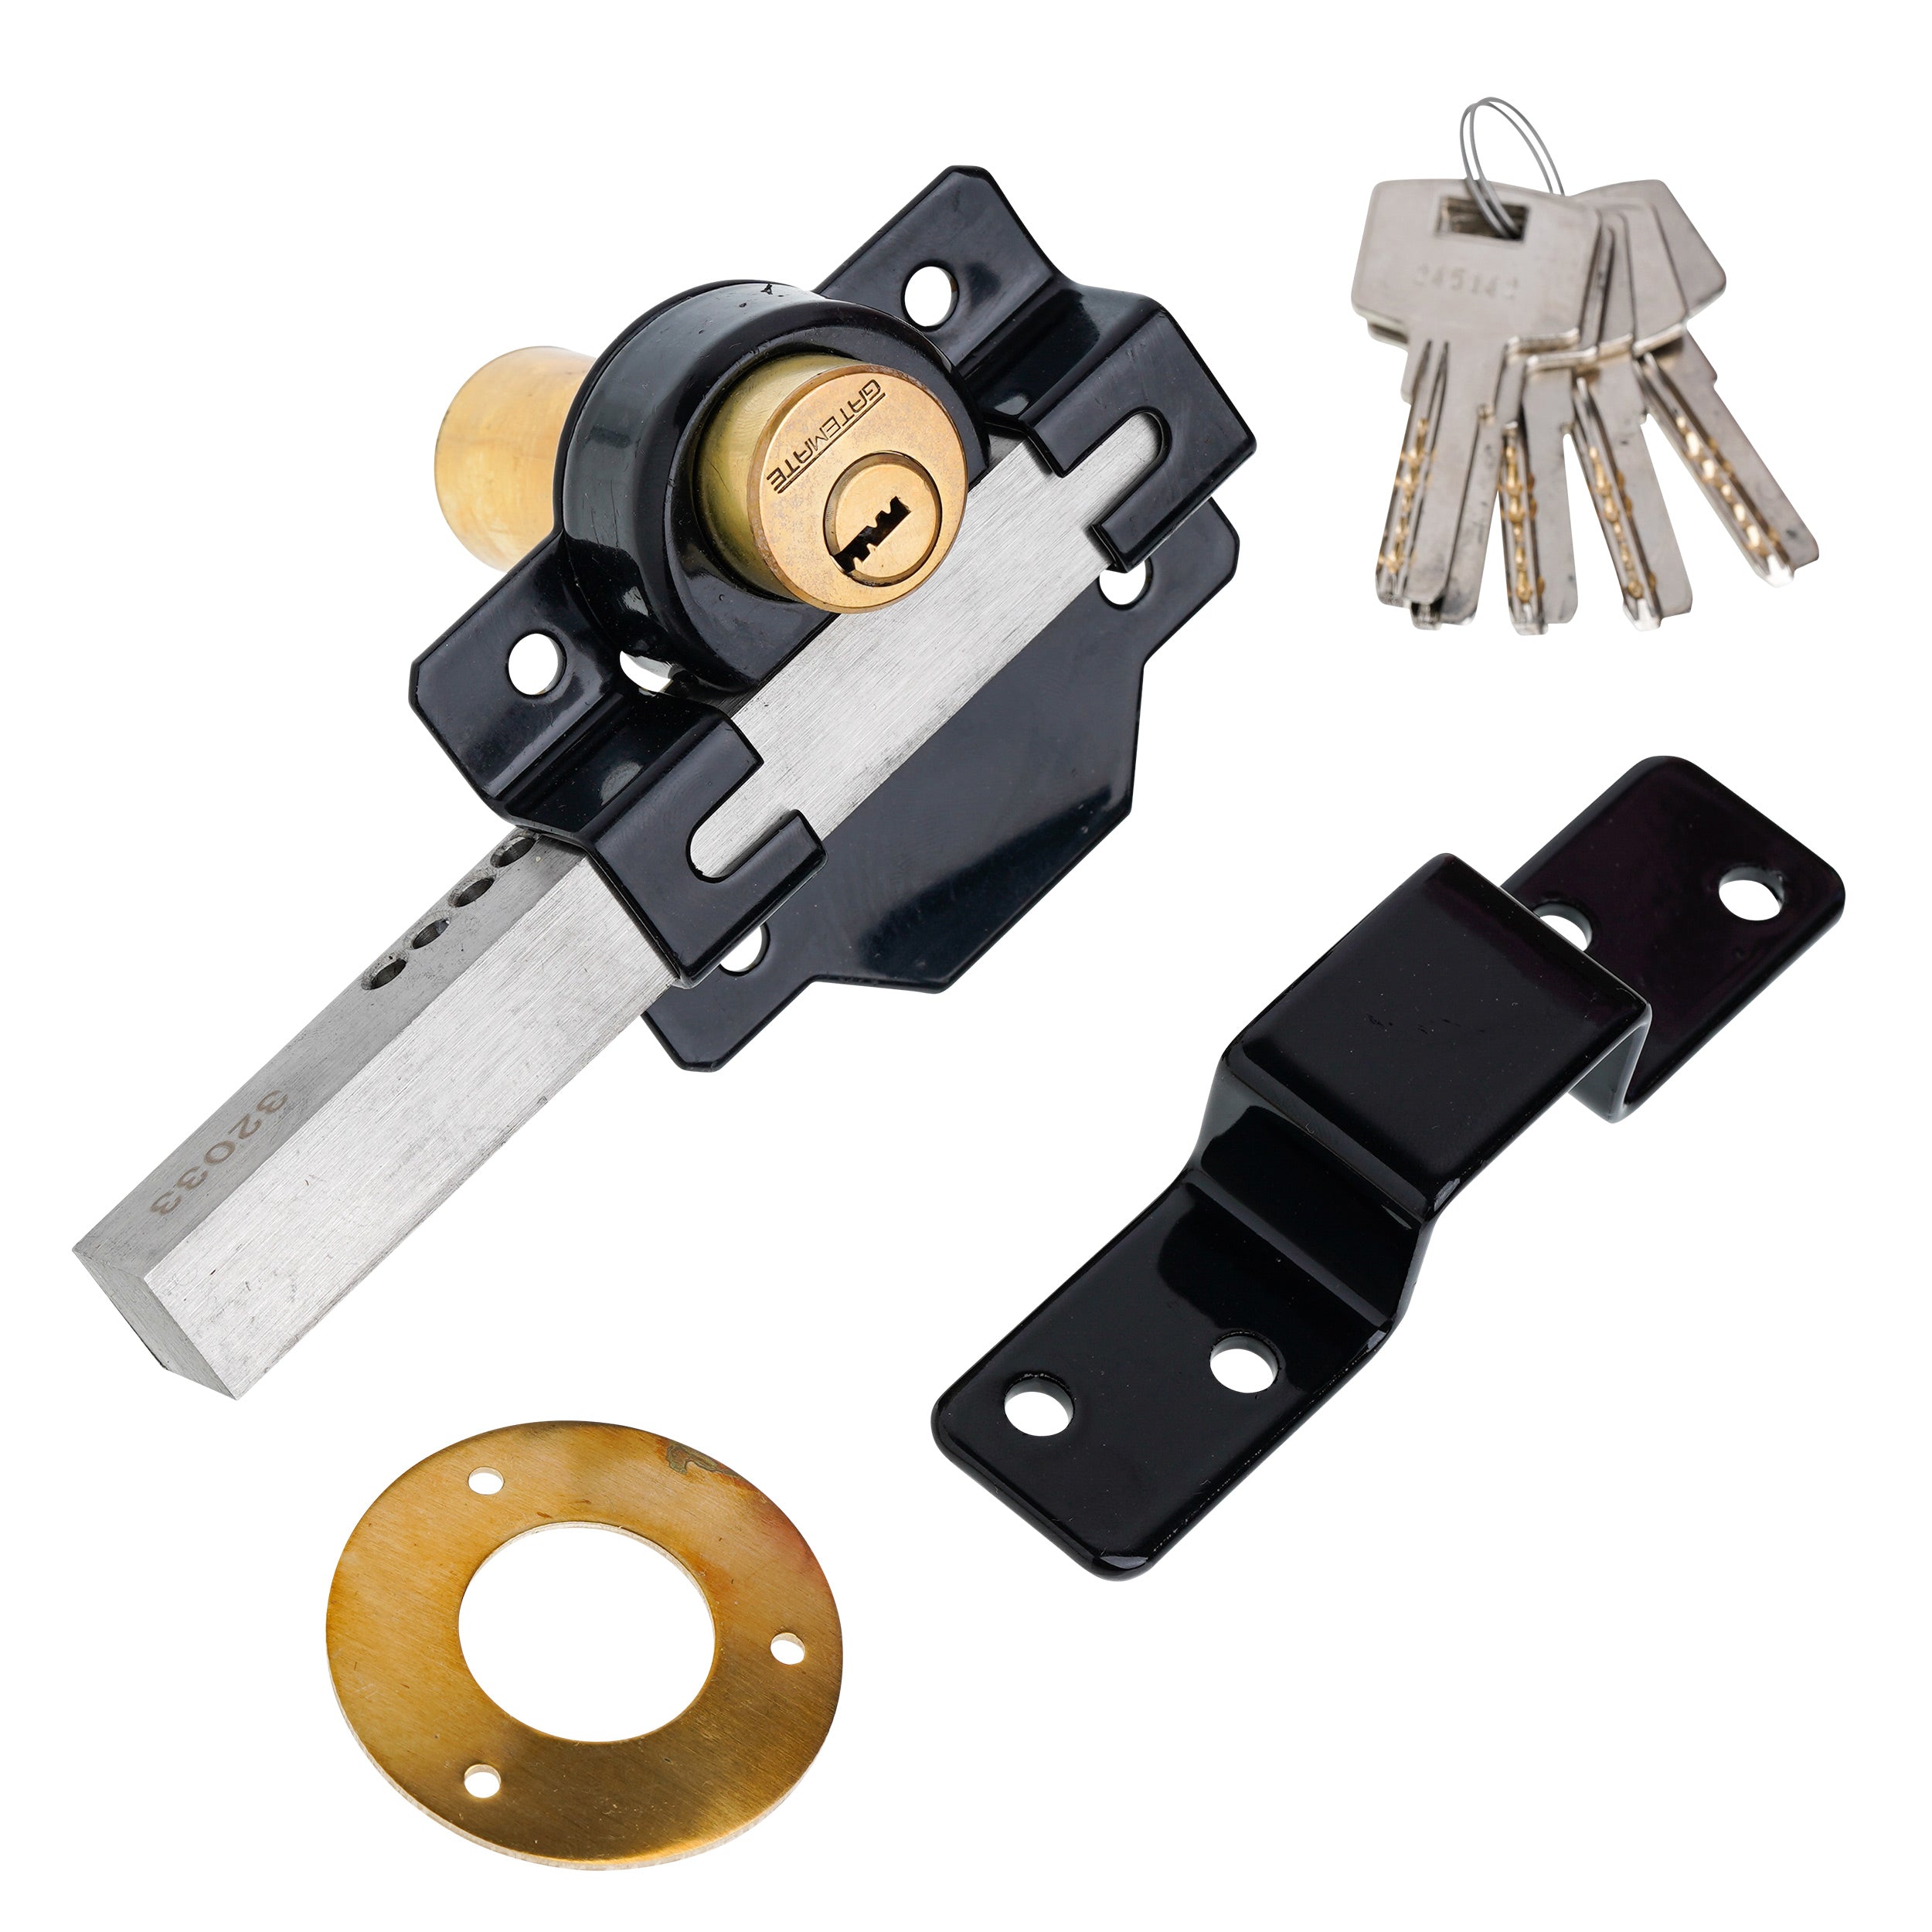 2" Long Throw Gate Lock, picture includes lock, keys and lock plate